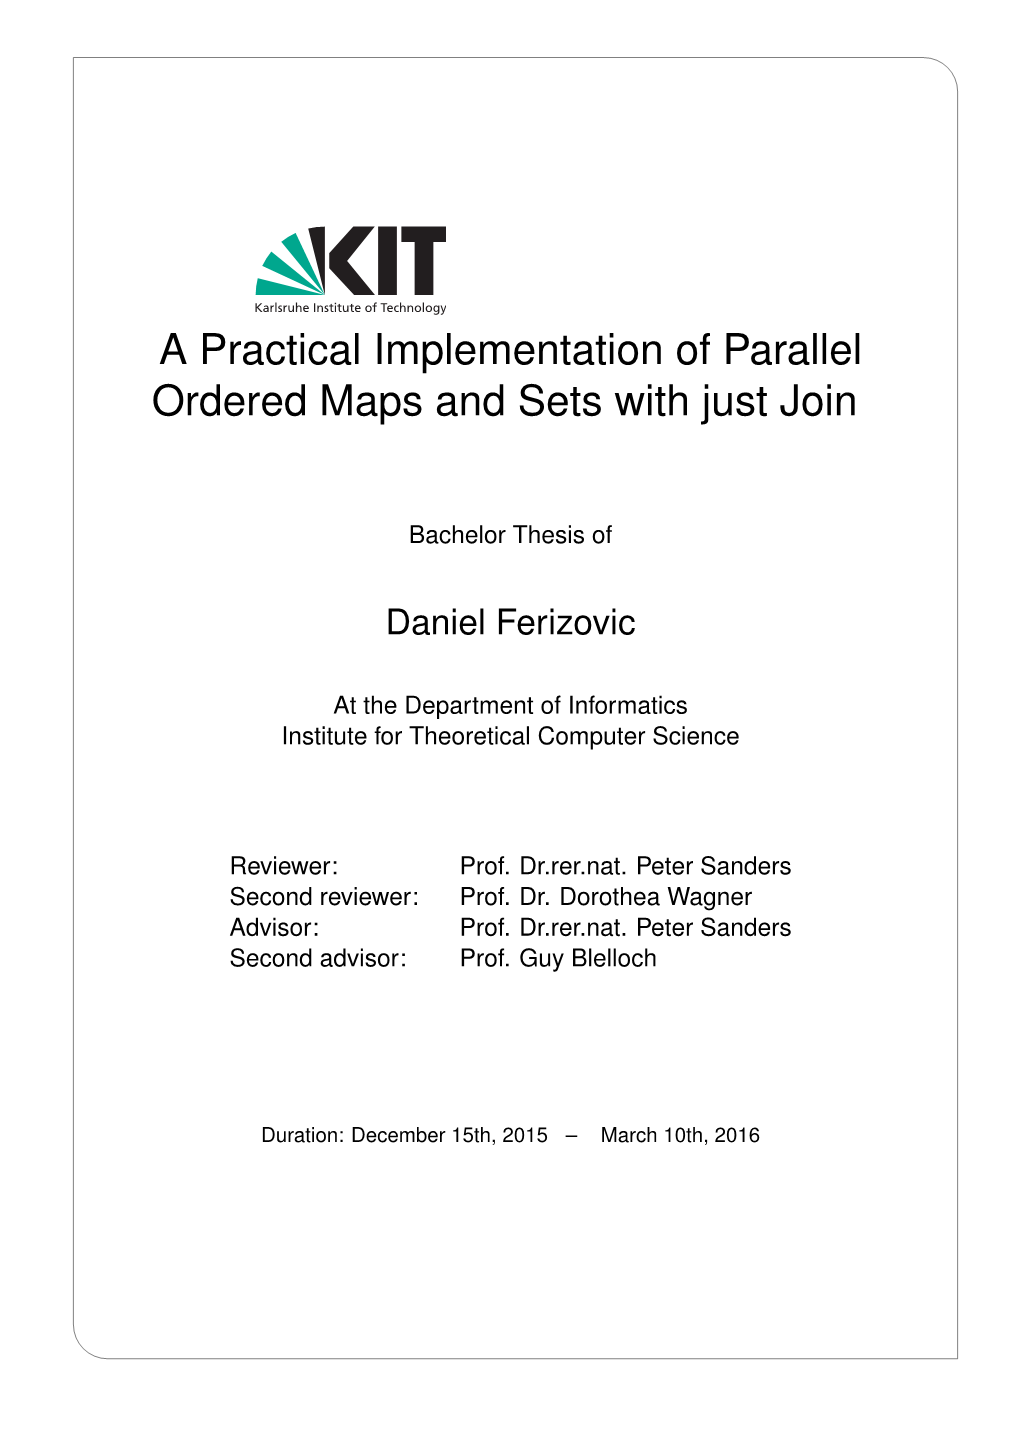 A Practical Implementation of Parallel Ordered Maps and Sets with Just Join